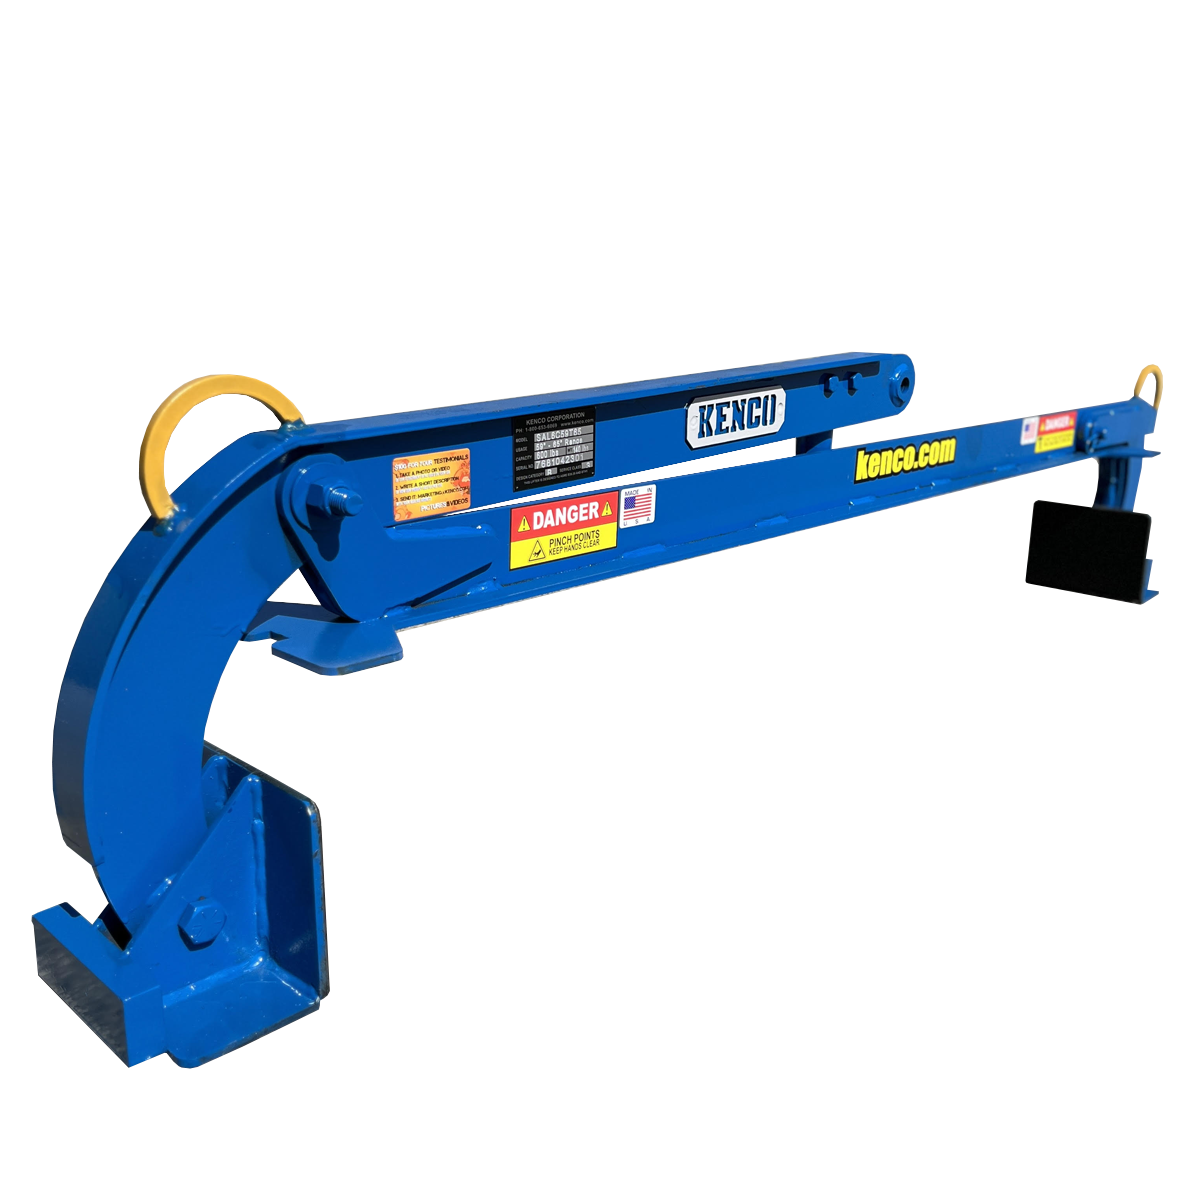 Elongated single arm lifting attachment for moving boxes off a pallet.